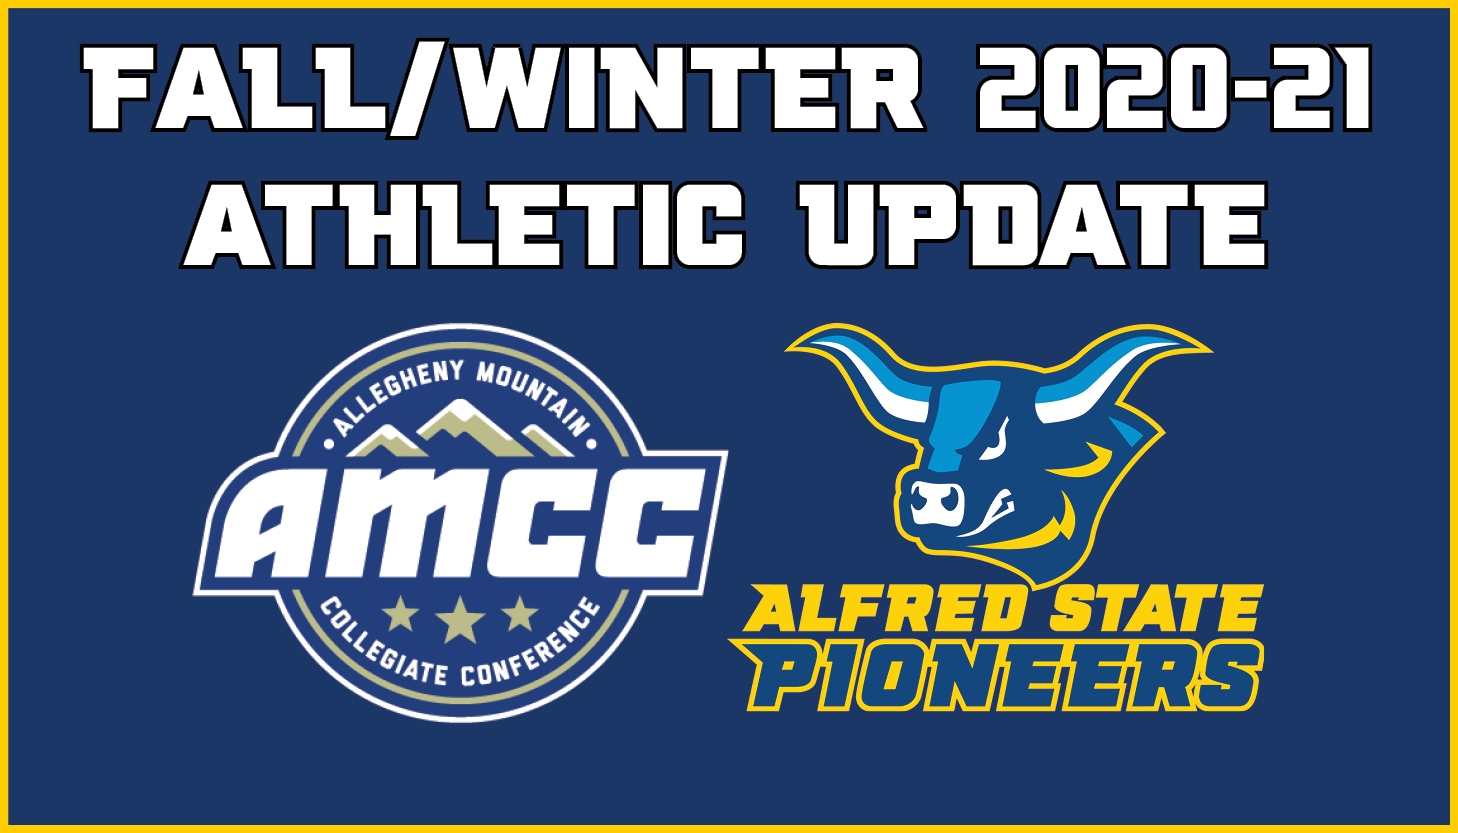 Fall/Winer 2020-21 athletic department updates - pictured is the AMCC logo and the Alfred State Ox Head logo.